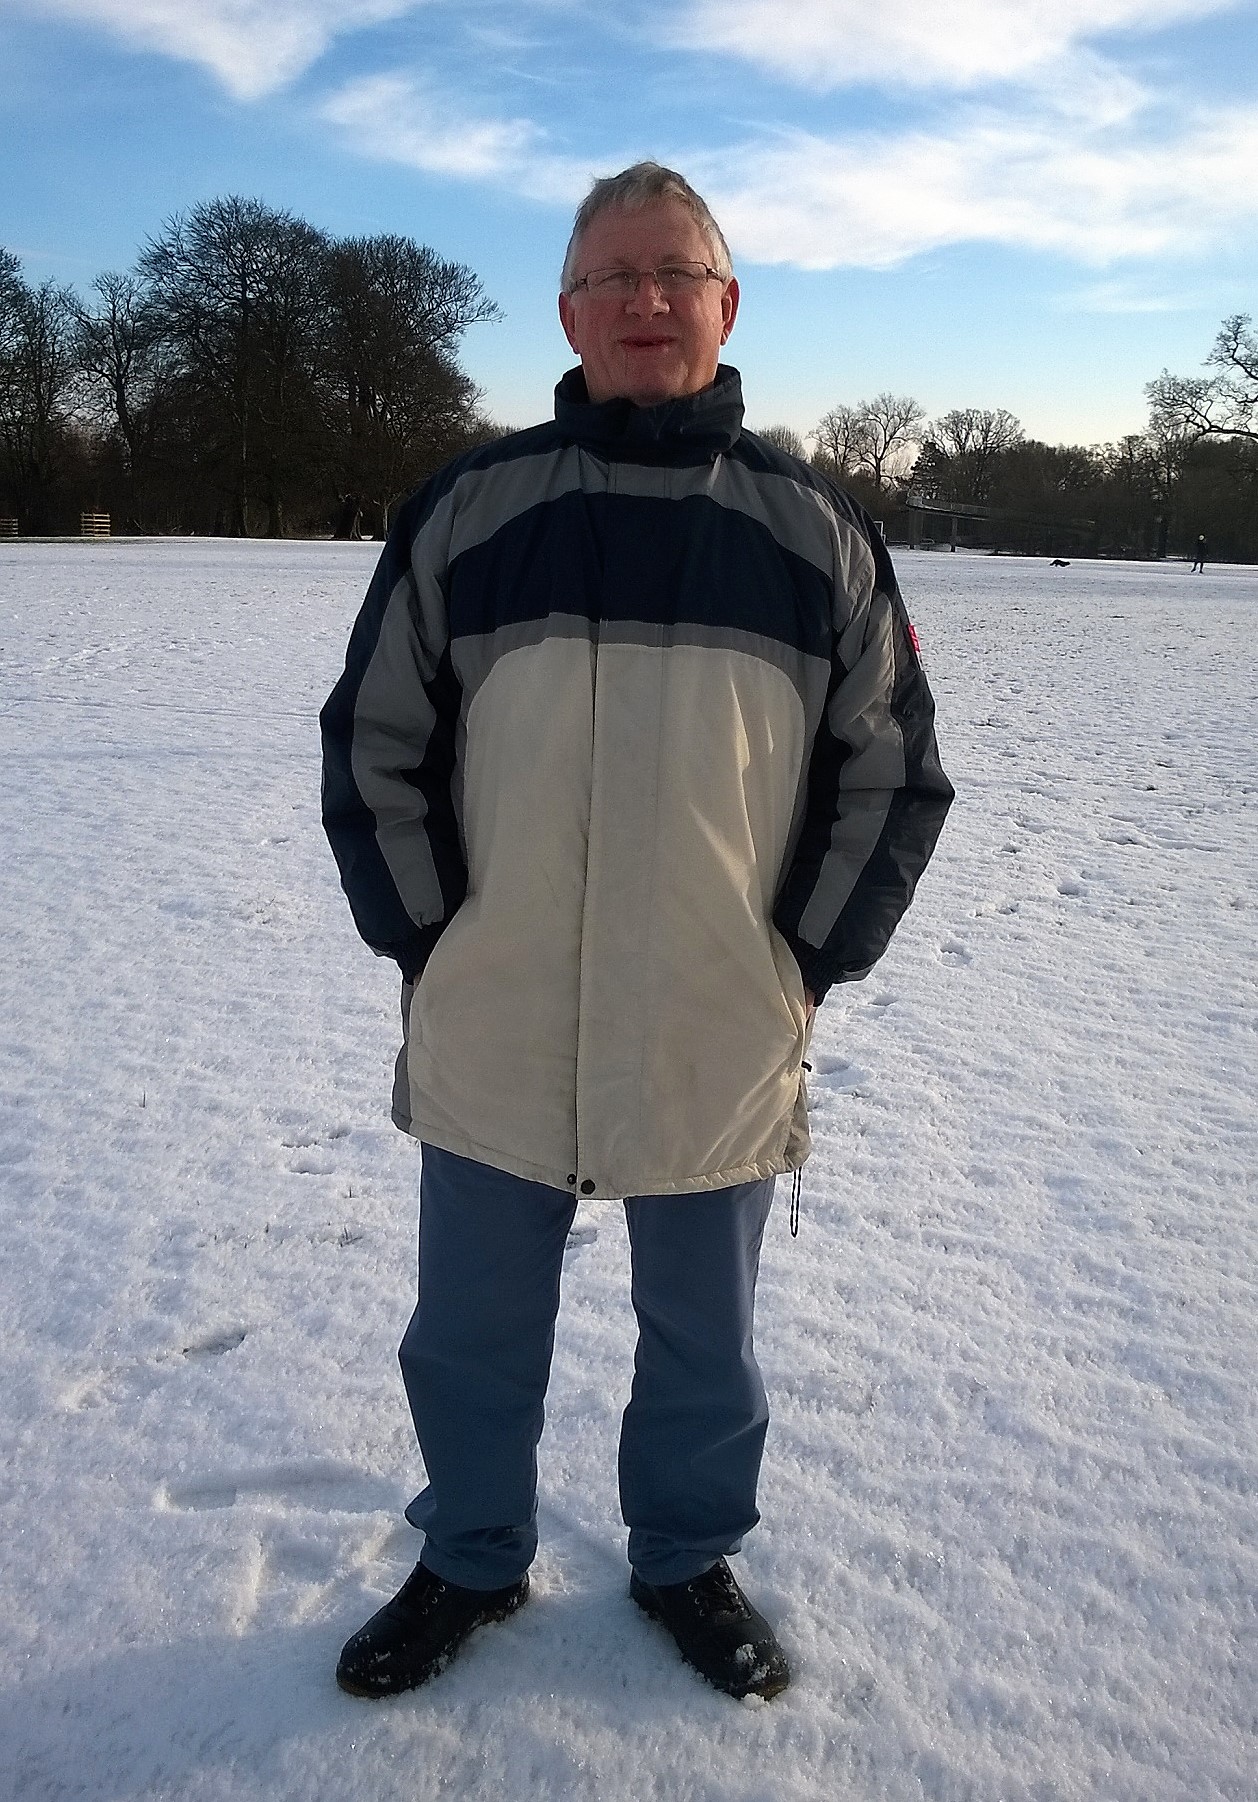 An image of Brian Marshall standing in a snowy field